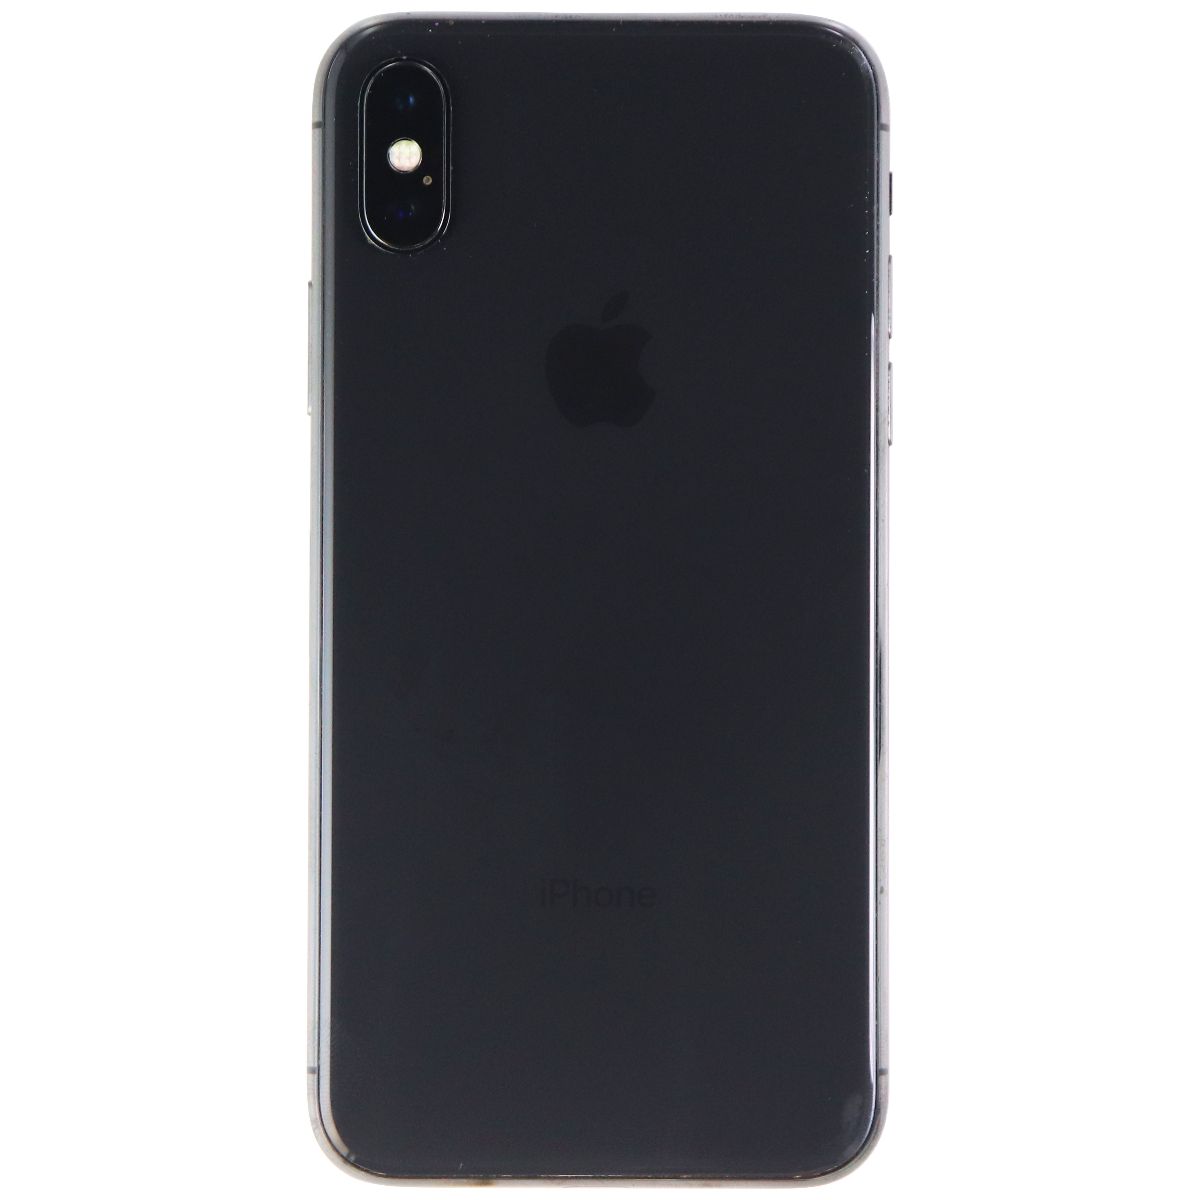 Apple iPhone X (5.8-inch)(A1901) Unlocked - 64GB / Space Gray - Bad Face ID* Cell Phones & Smartphones Apple    - Simple Cell Bulk Wholesale Pricing - USA Seller